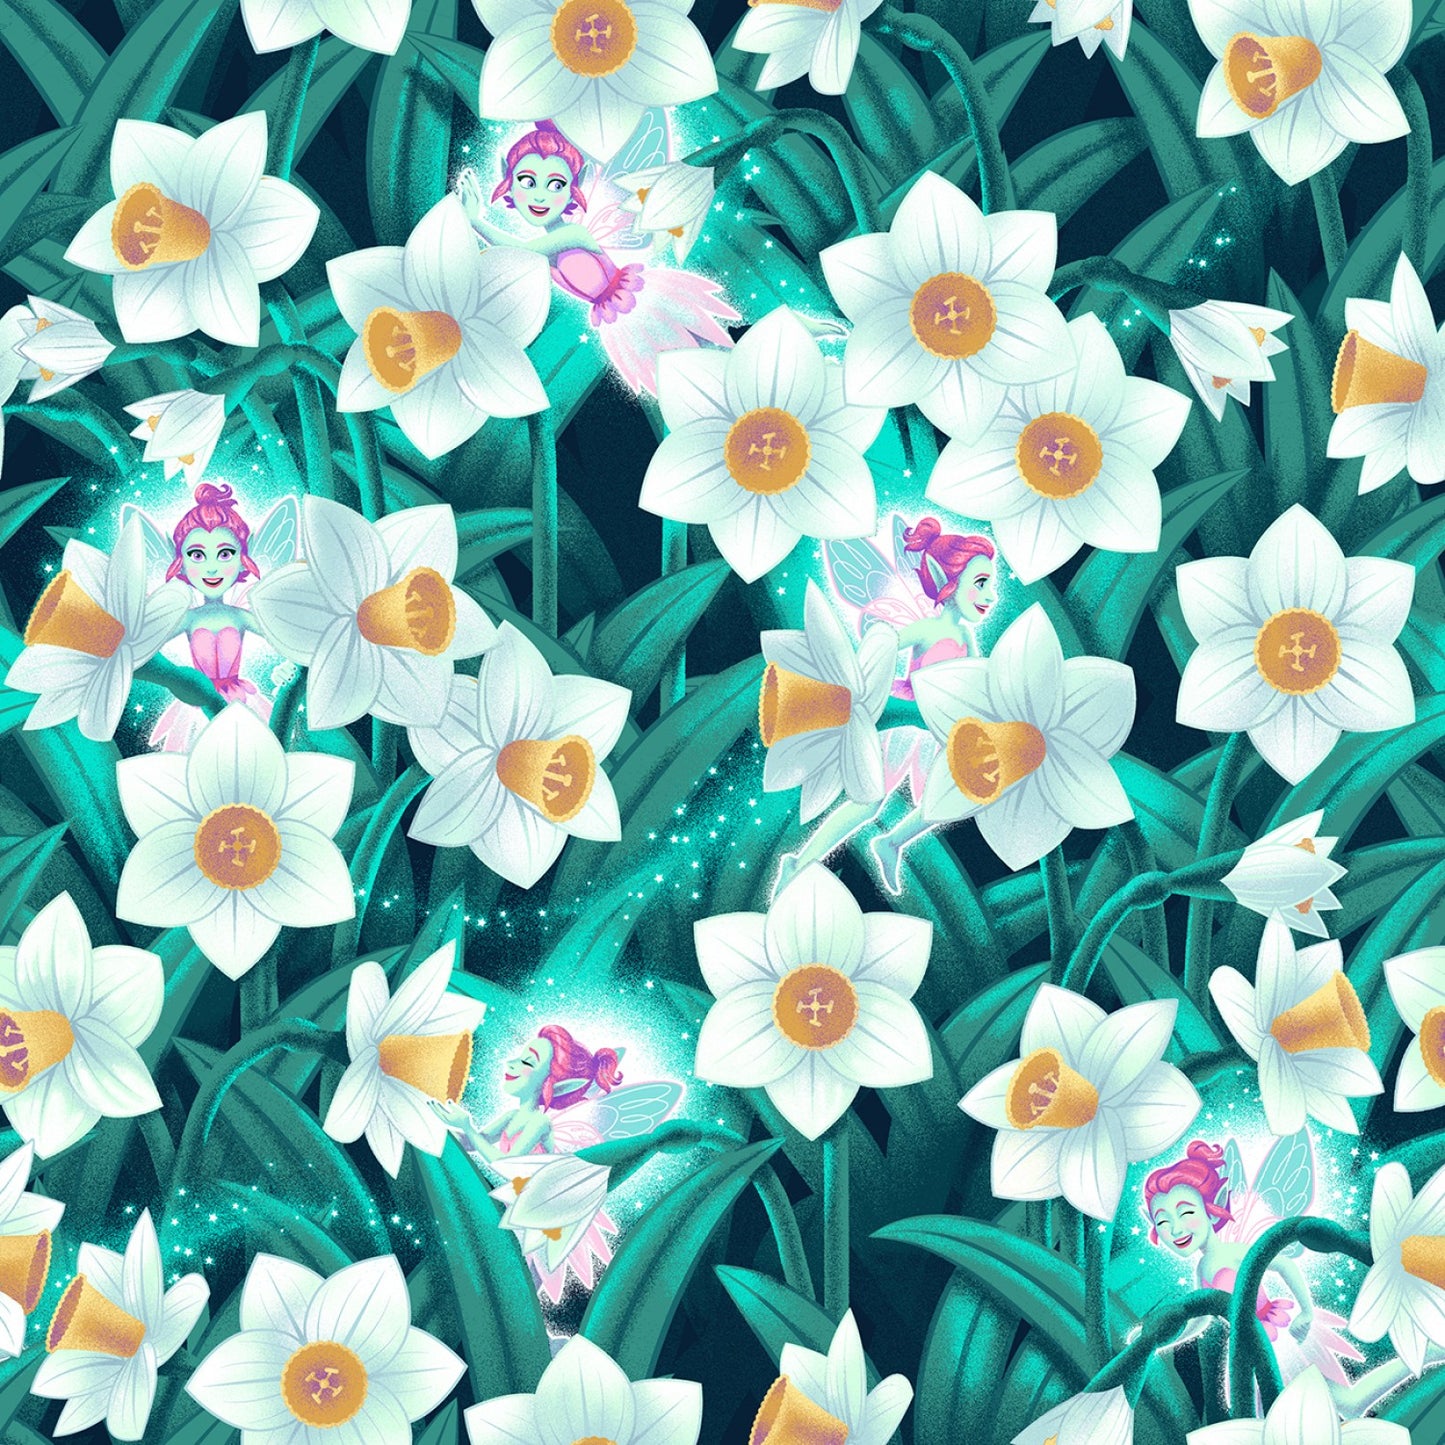 Pixies & Petals Glows in the Dark by Salt Meadows Studio Pixies and Daffodils Green/White    188G-66 Cotton Woven Fabric